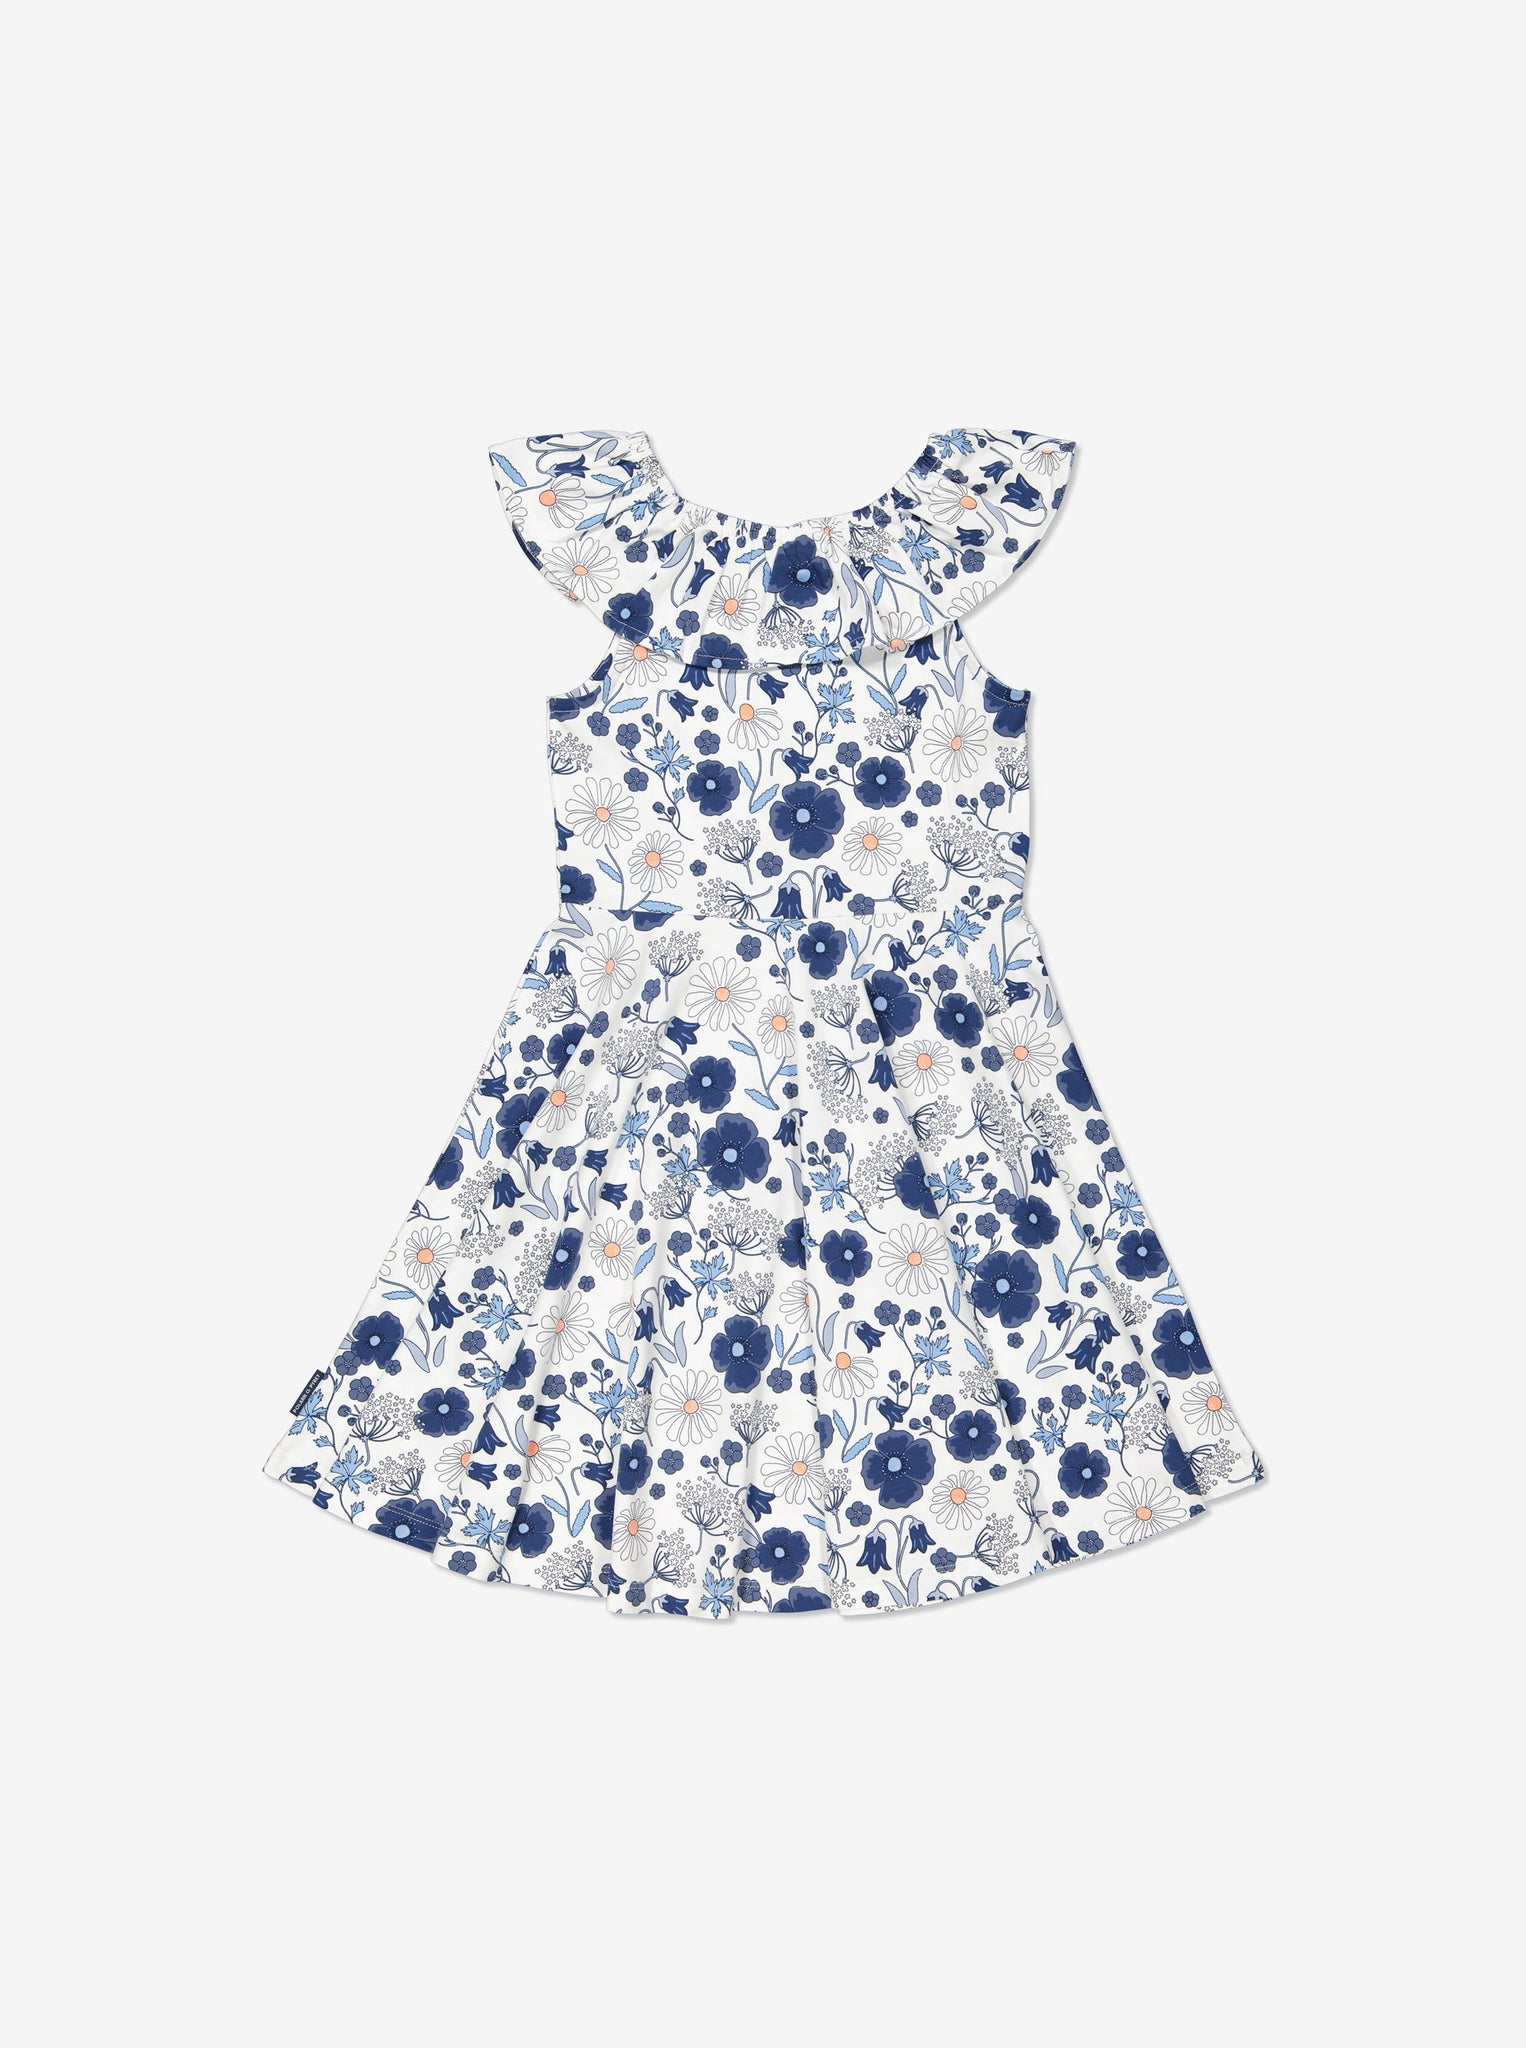 Blue Floral Print Girls Dress from Polarn O. Pyret Kidswear. Made using sustainable sourced materials.